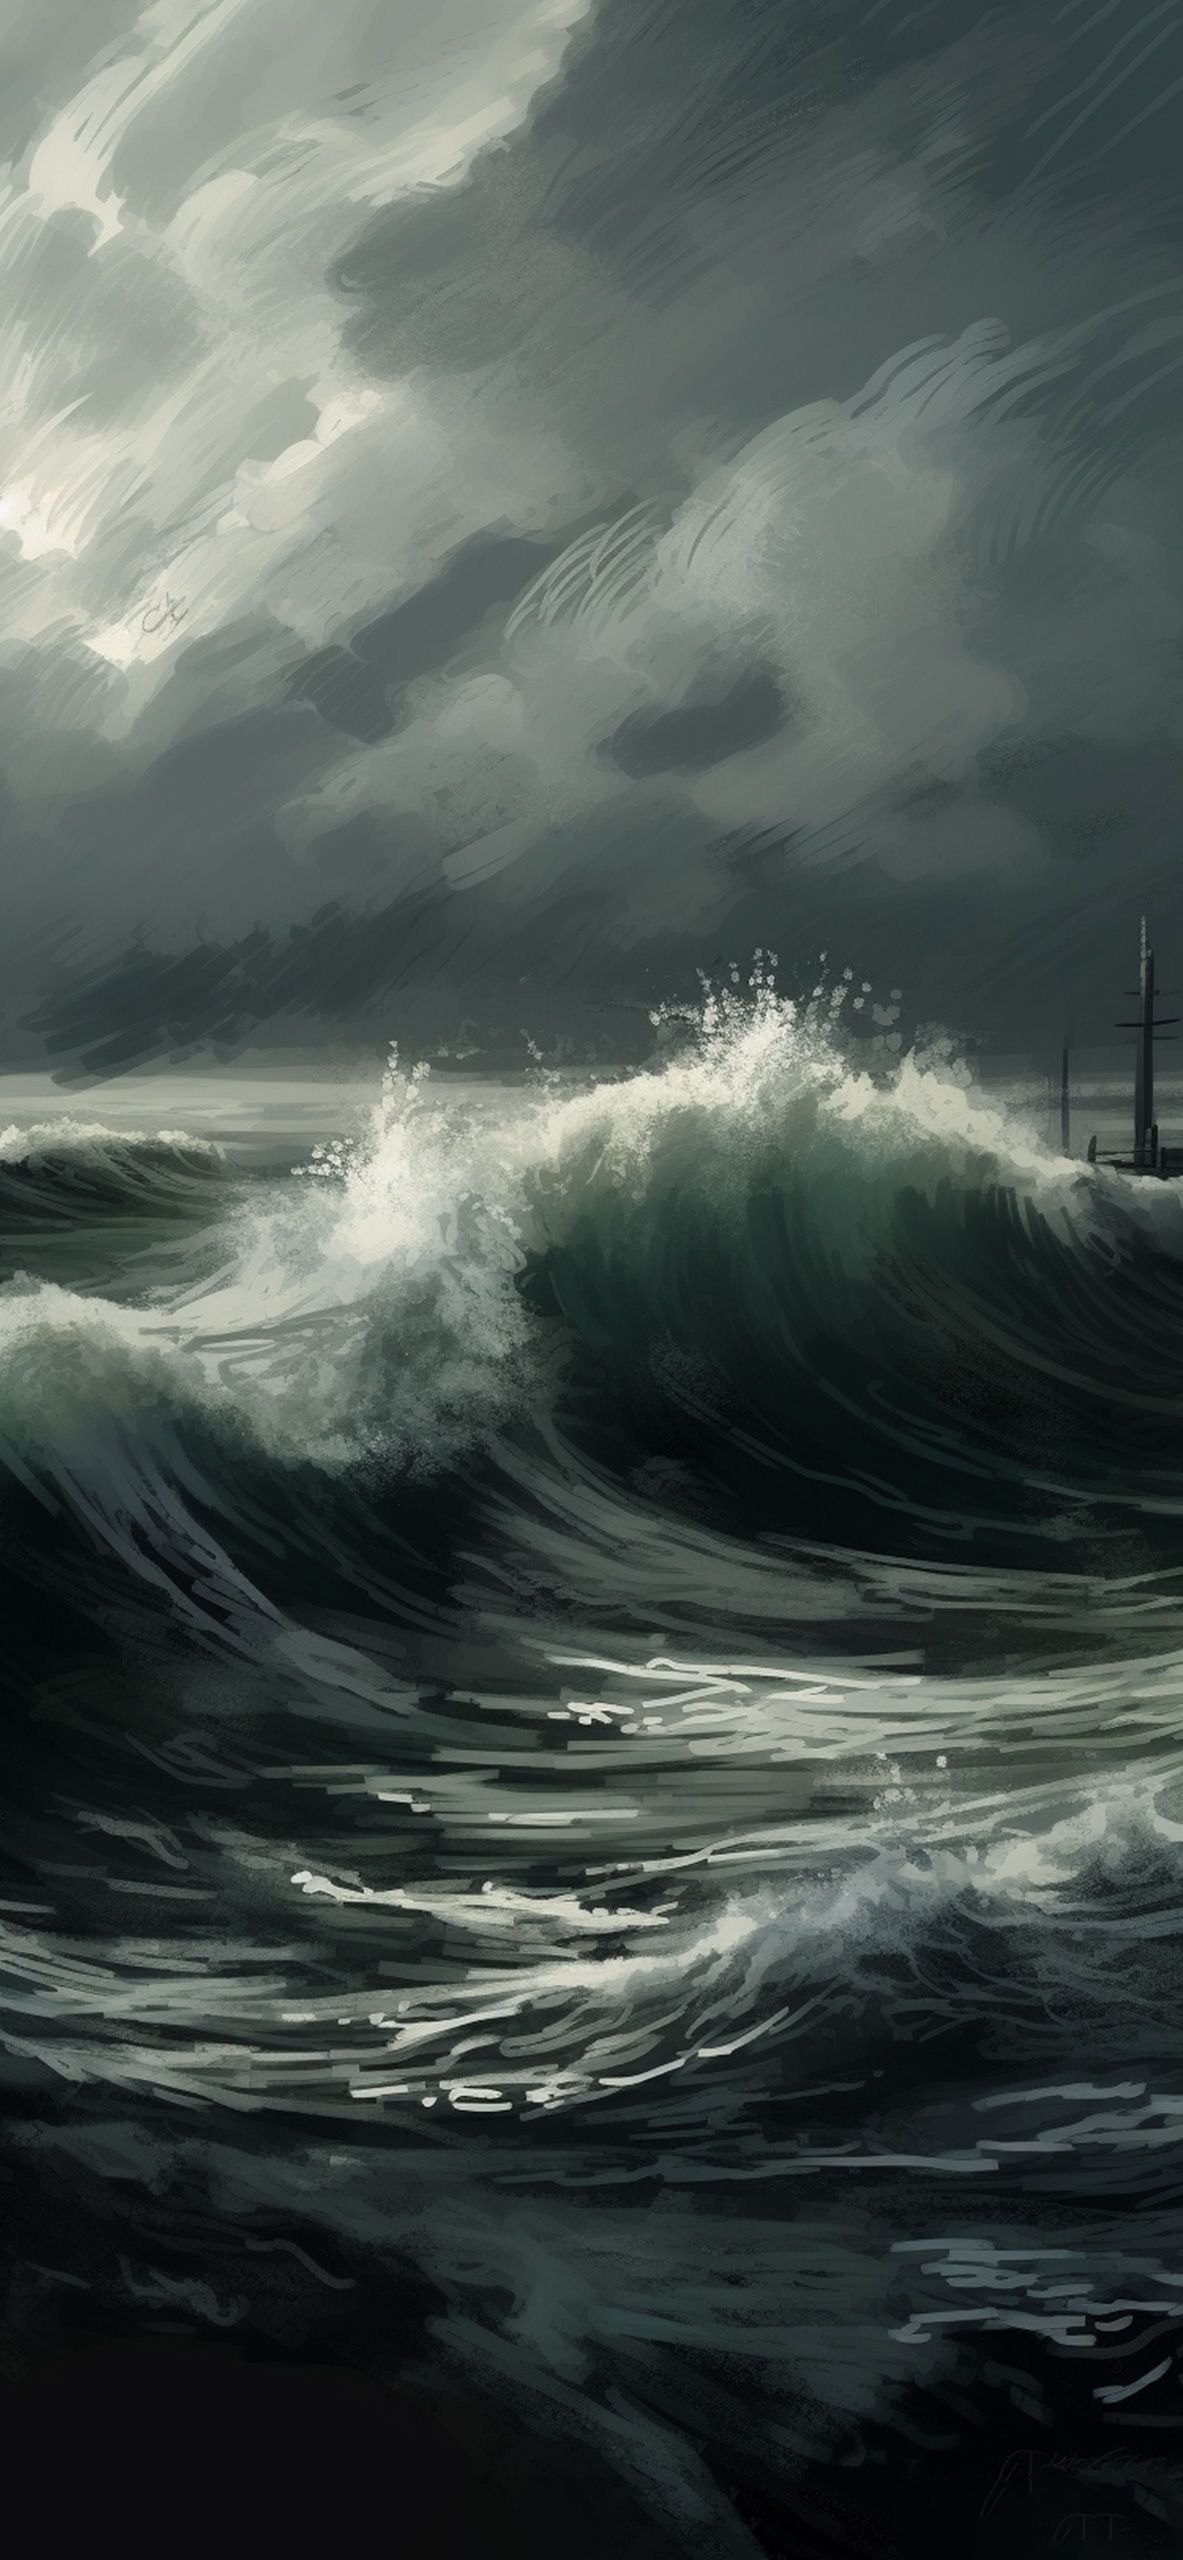 An artistic wallpaper of a stormy sea - Storm